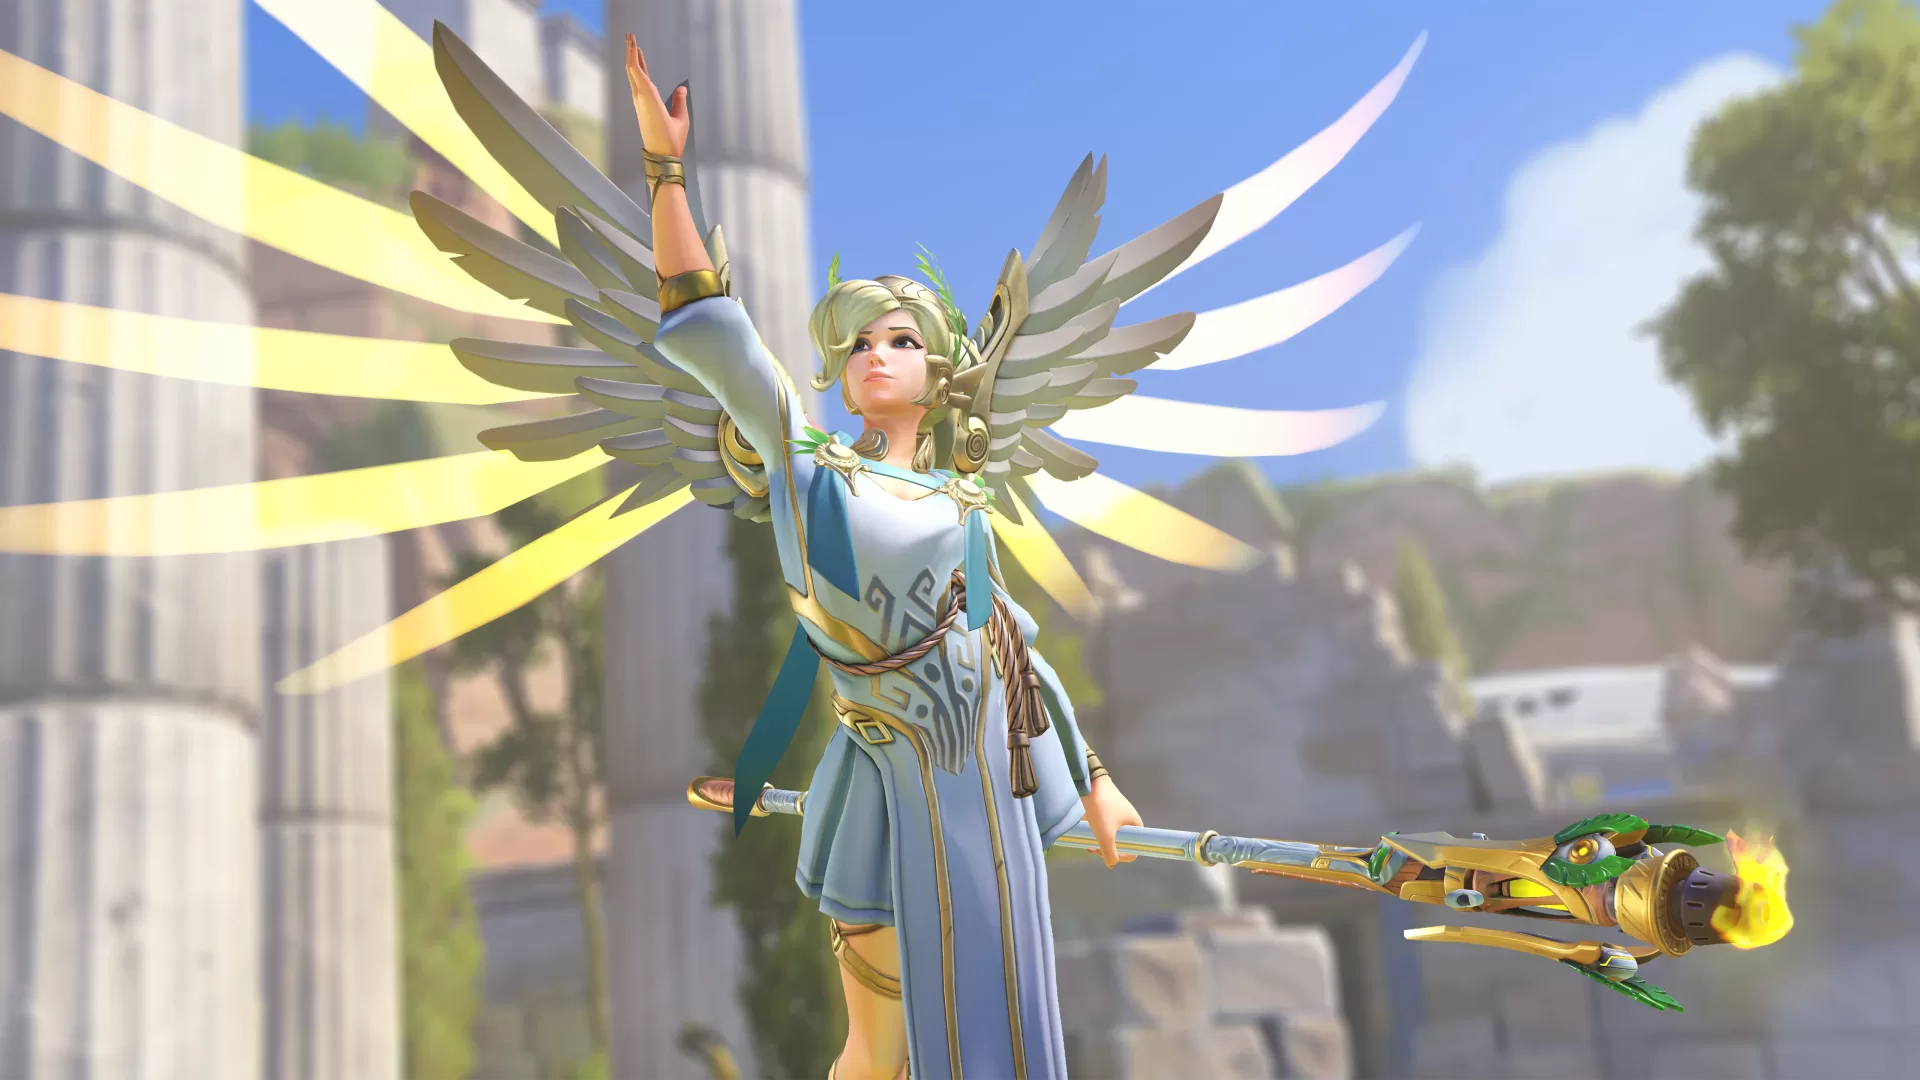 Overwatch 2 - Mercy Winged - Victory Skin 02 - Summer Games